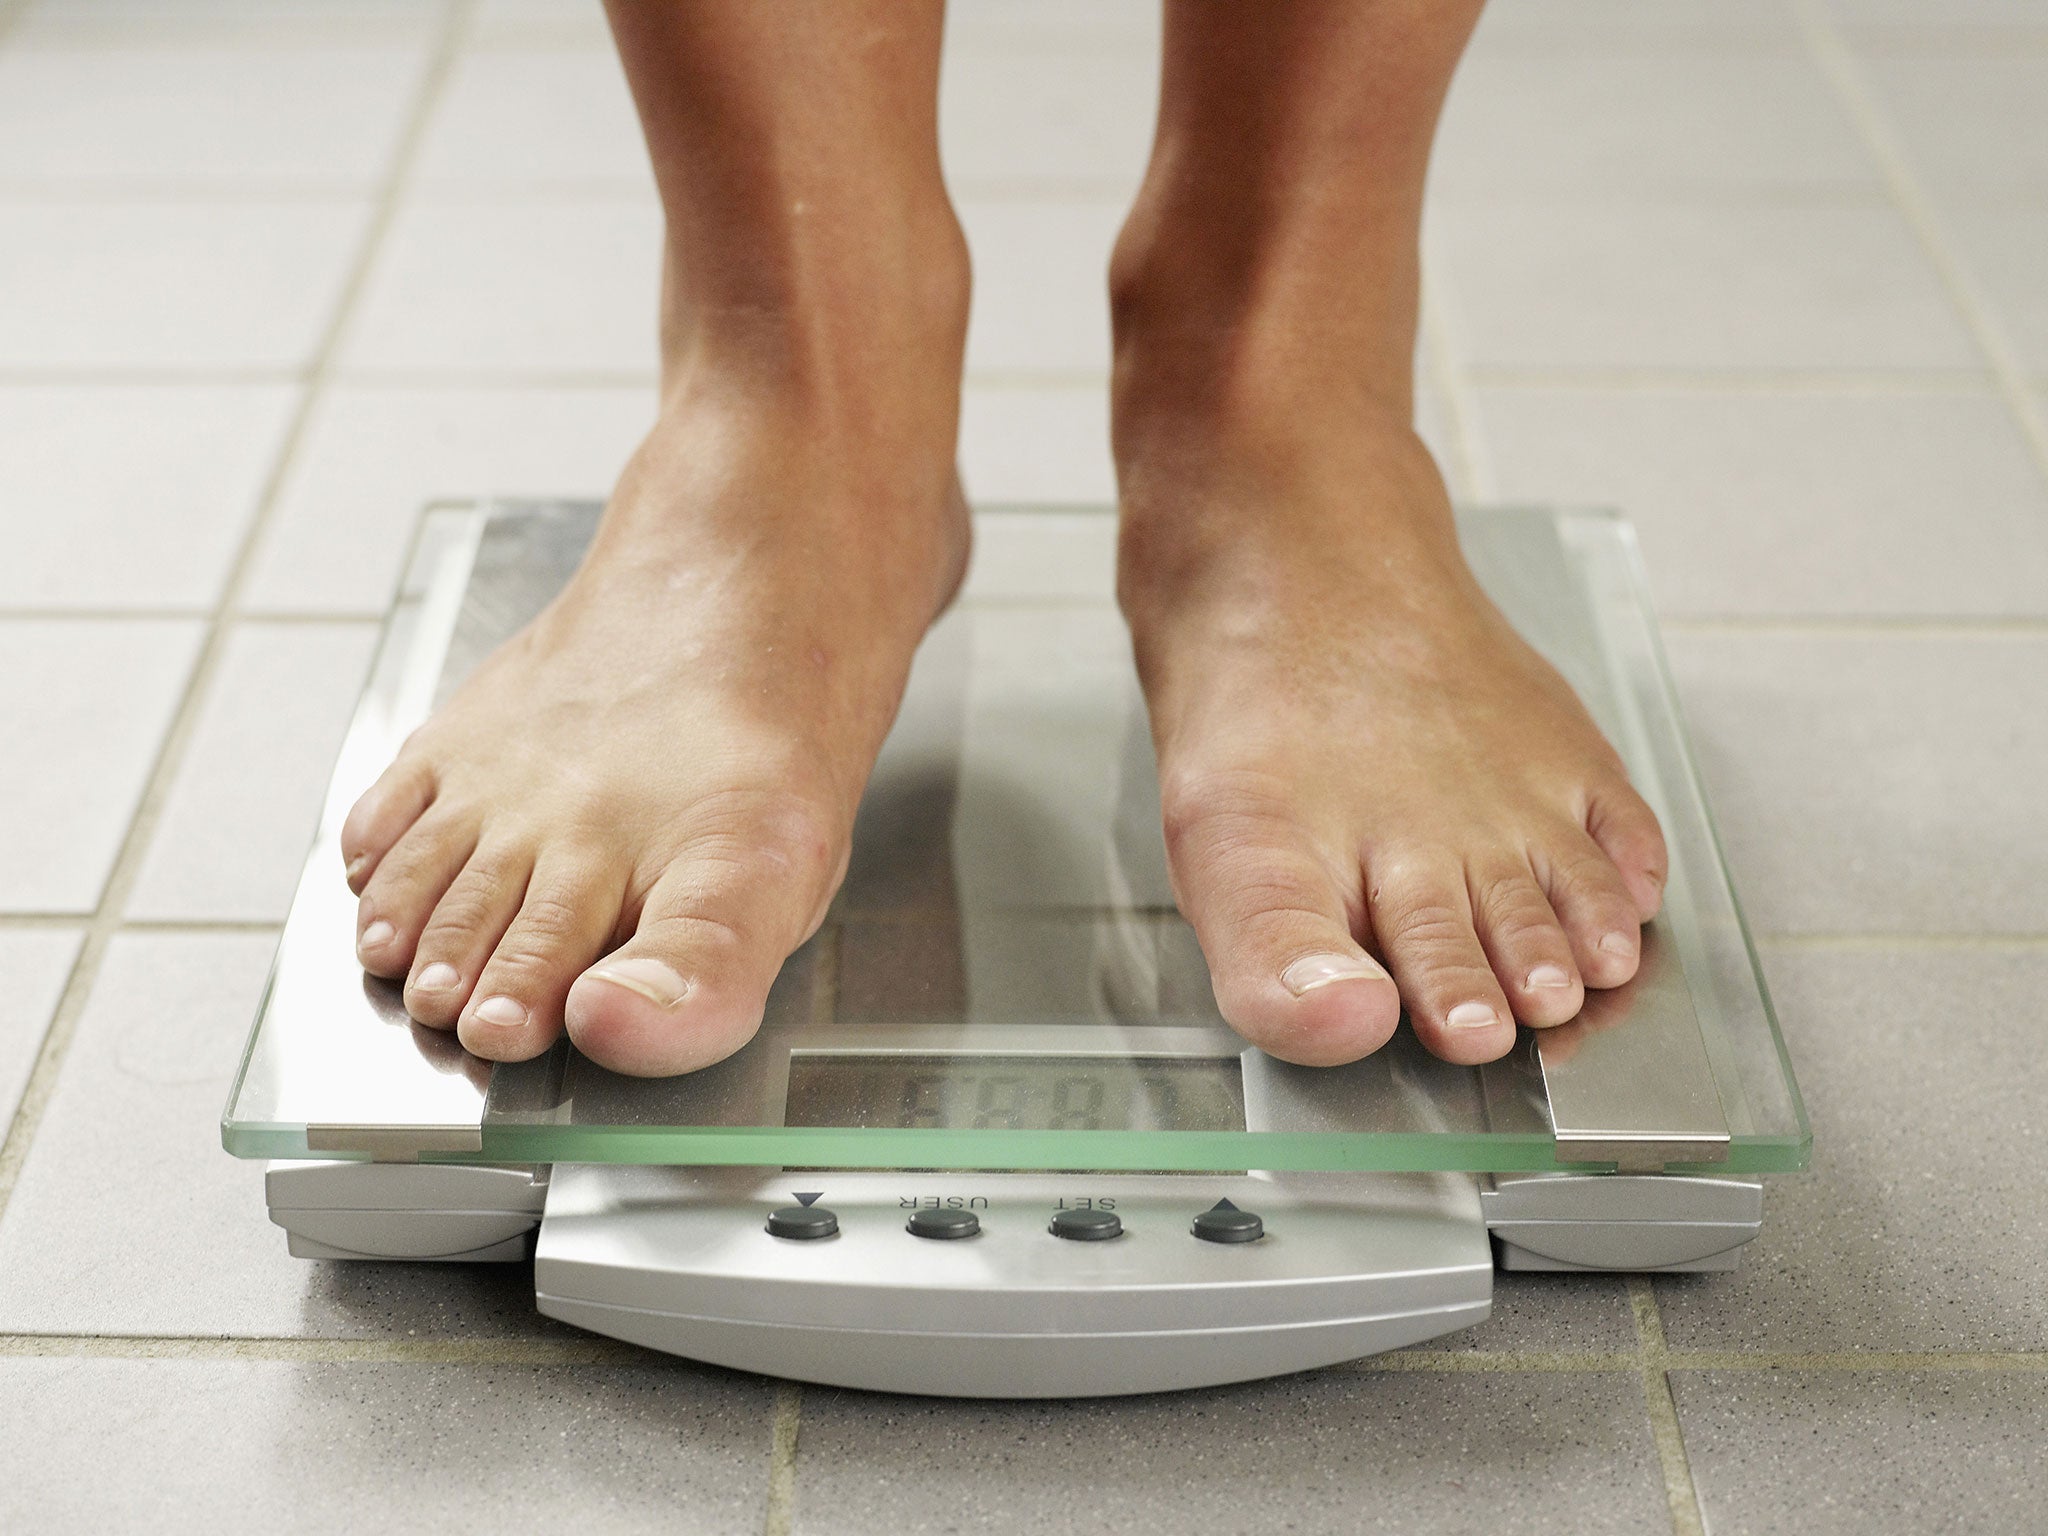 Around 63 per cent of UK adults are overweight or obese